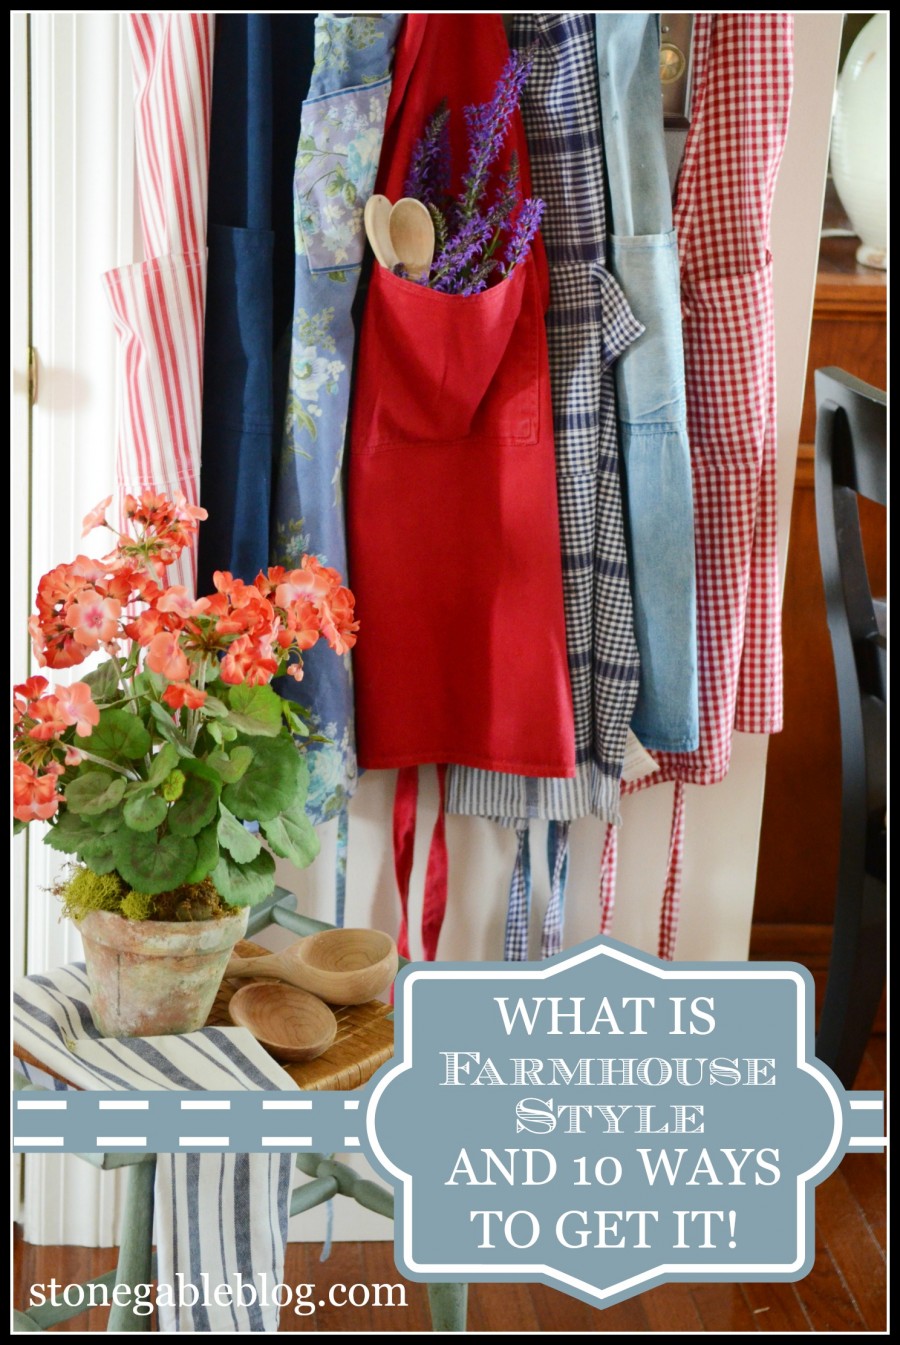 WHAT IS FARMHOUSE STYLE AND 10 WAYS TO GET IT